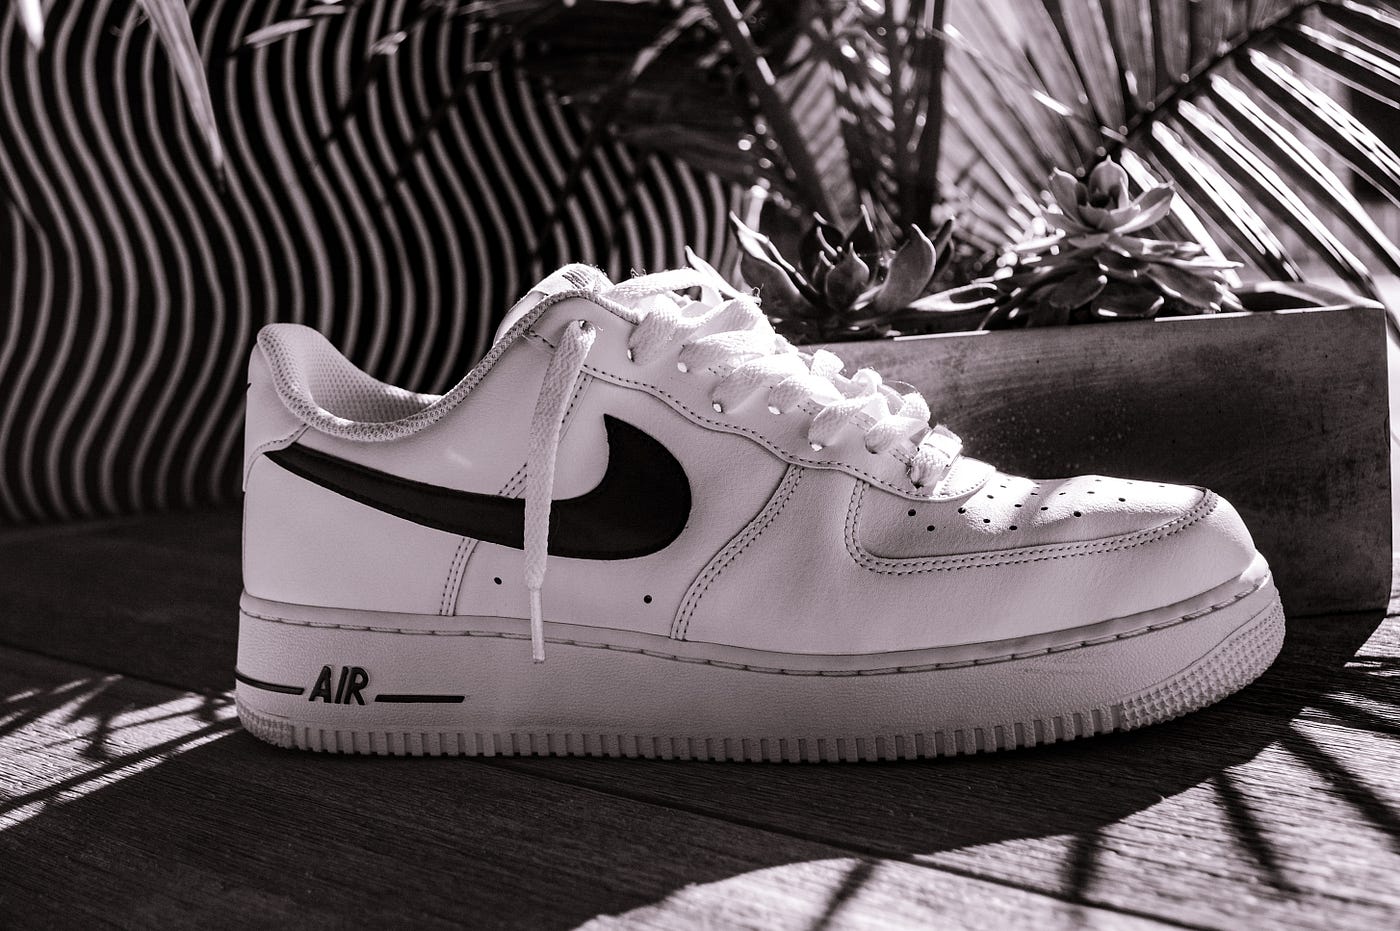 The history behind the hype: Nike Air Force 1s